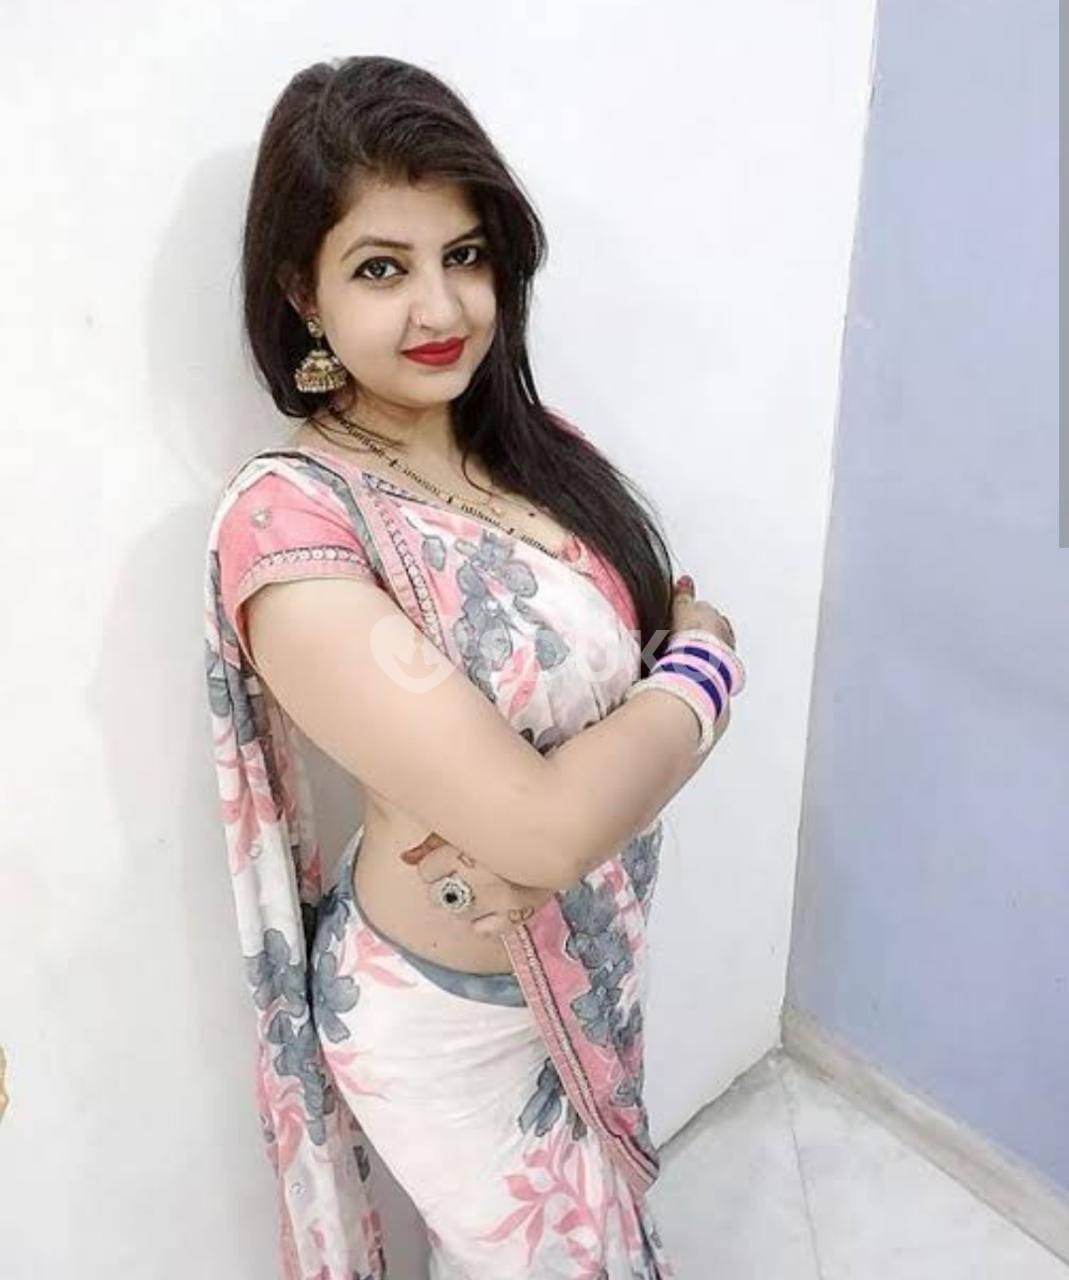 Divya Josi ❣️✅🔥▄BEST ESCORT TODAY LOW PRICE SAFE AND SECURE GENUINE CALL GIRL AFFORDABLE PRICE CALL NOW�